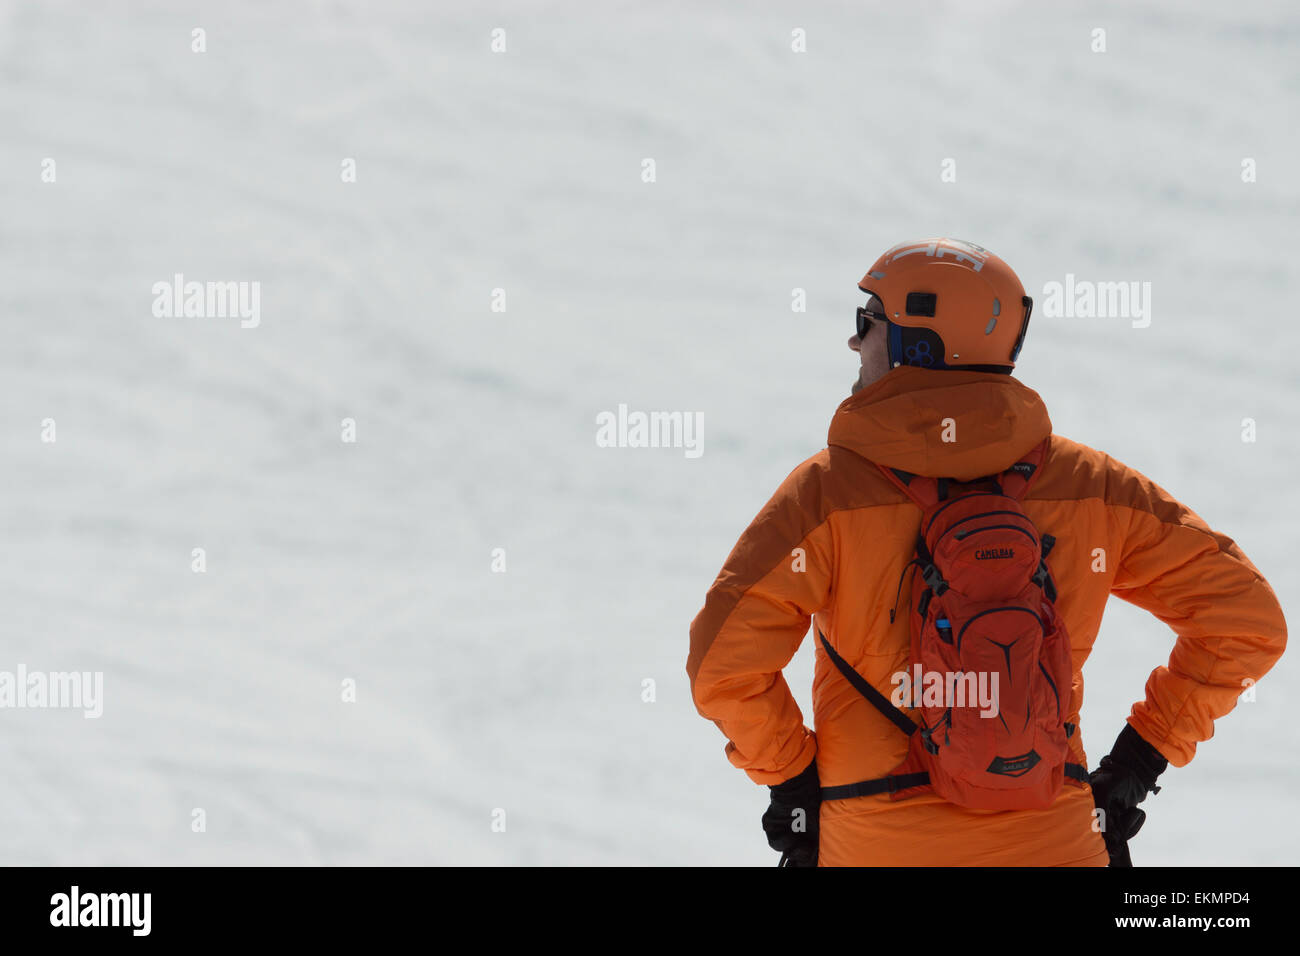 A snowboarder and a skier, enjoying the alps together playing around and admiring the views. Stock Photo